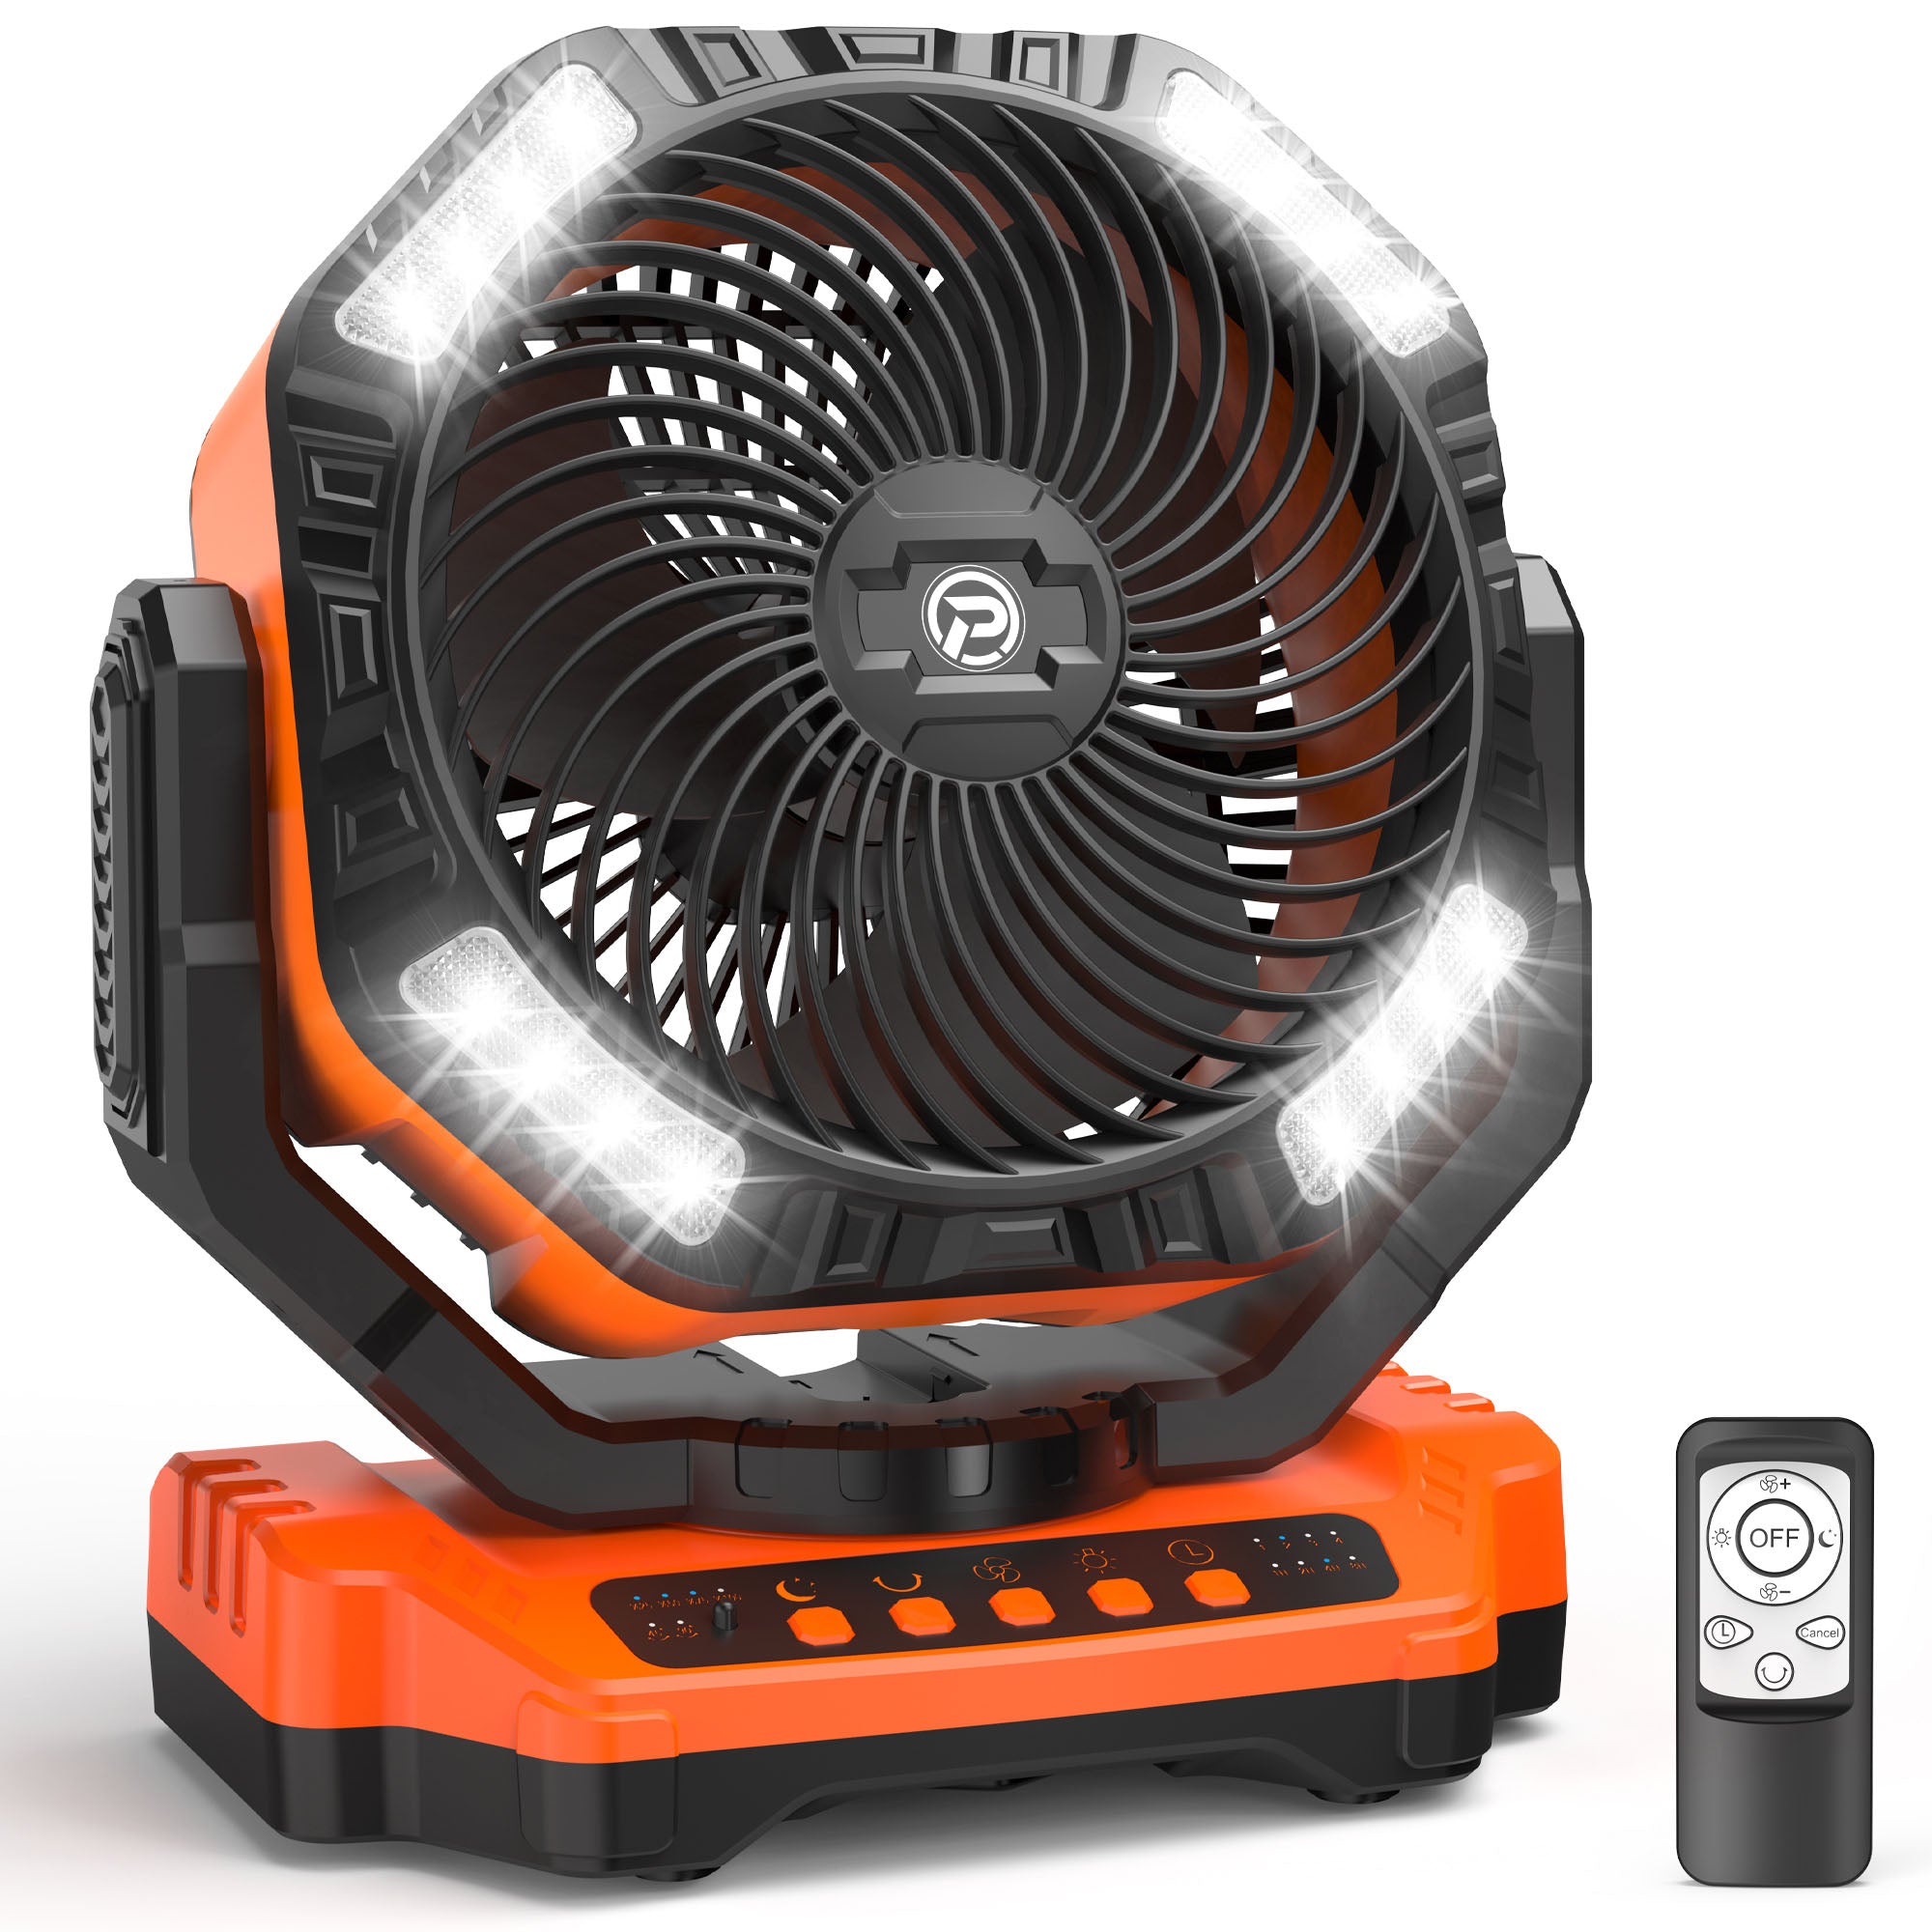 McLean Engineering 1RB120 12 Louvered Box Fan 115V 1700RPM Model